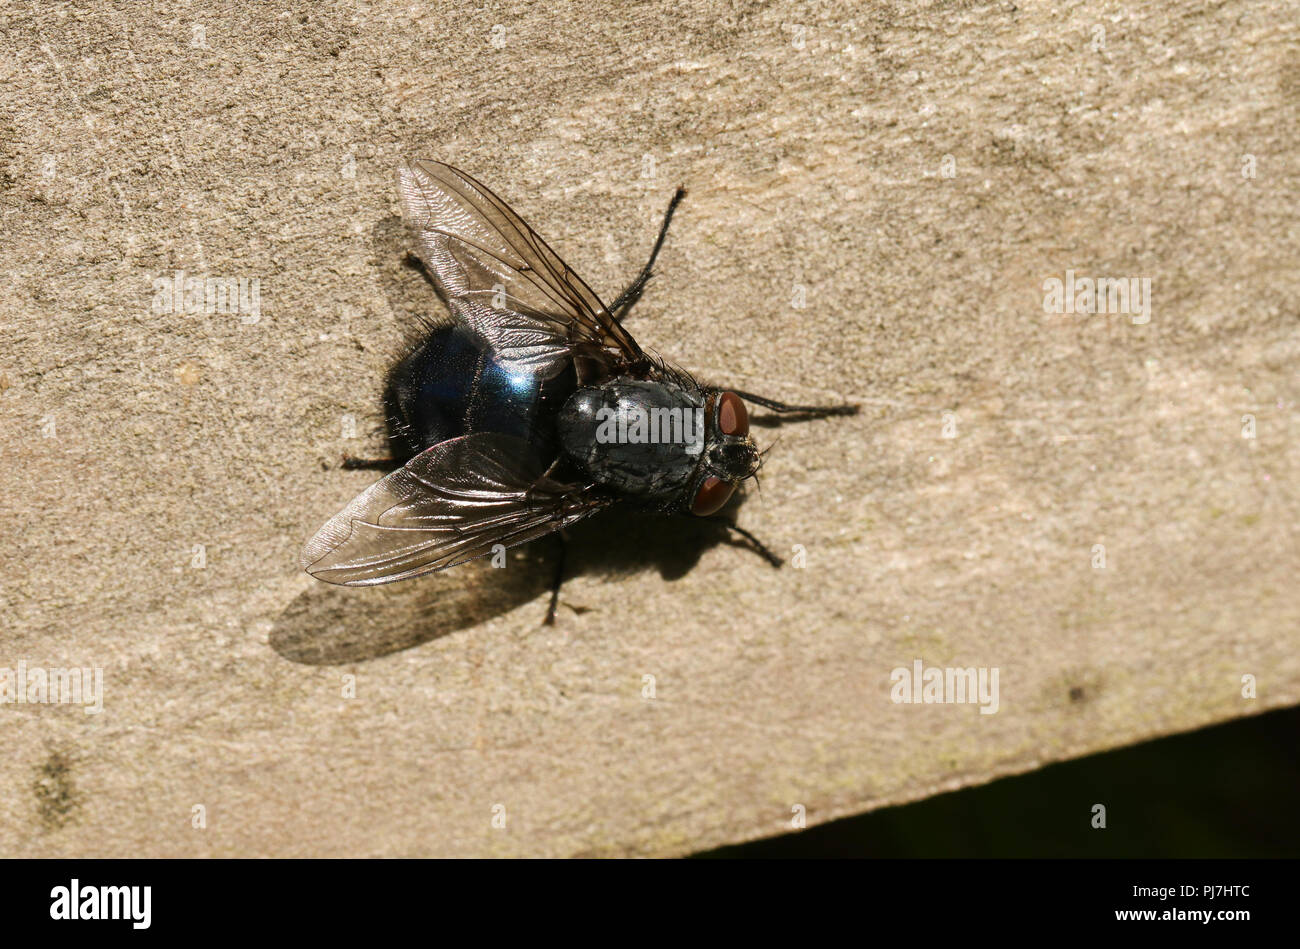 A large Common Bluebottle ( Calliphoridae - Blow-flies ) Calliphora vicina, perching on a wooden fence in woodland in the UK. Stock Photo